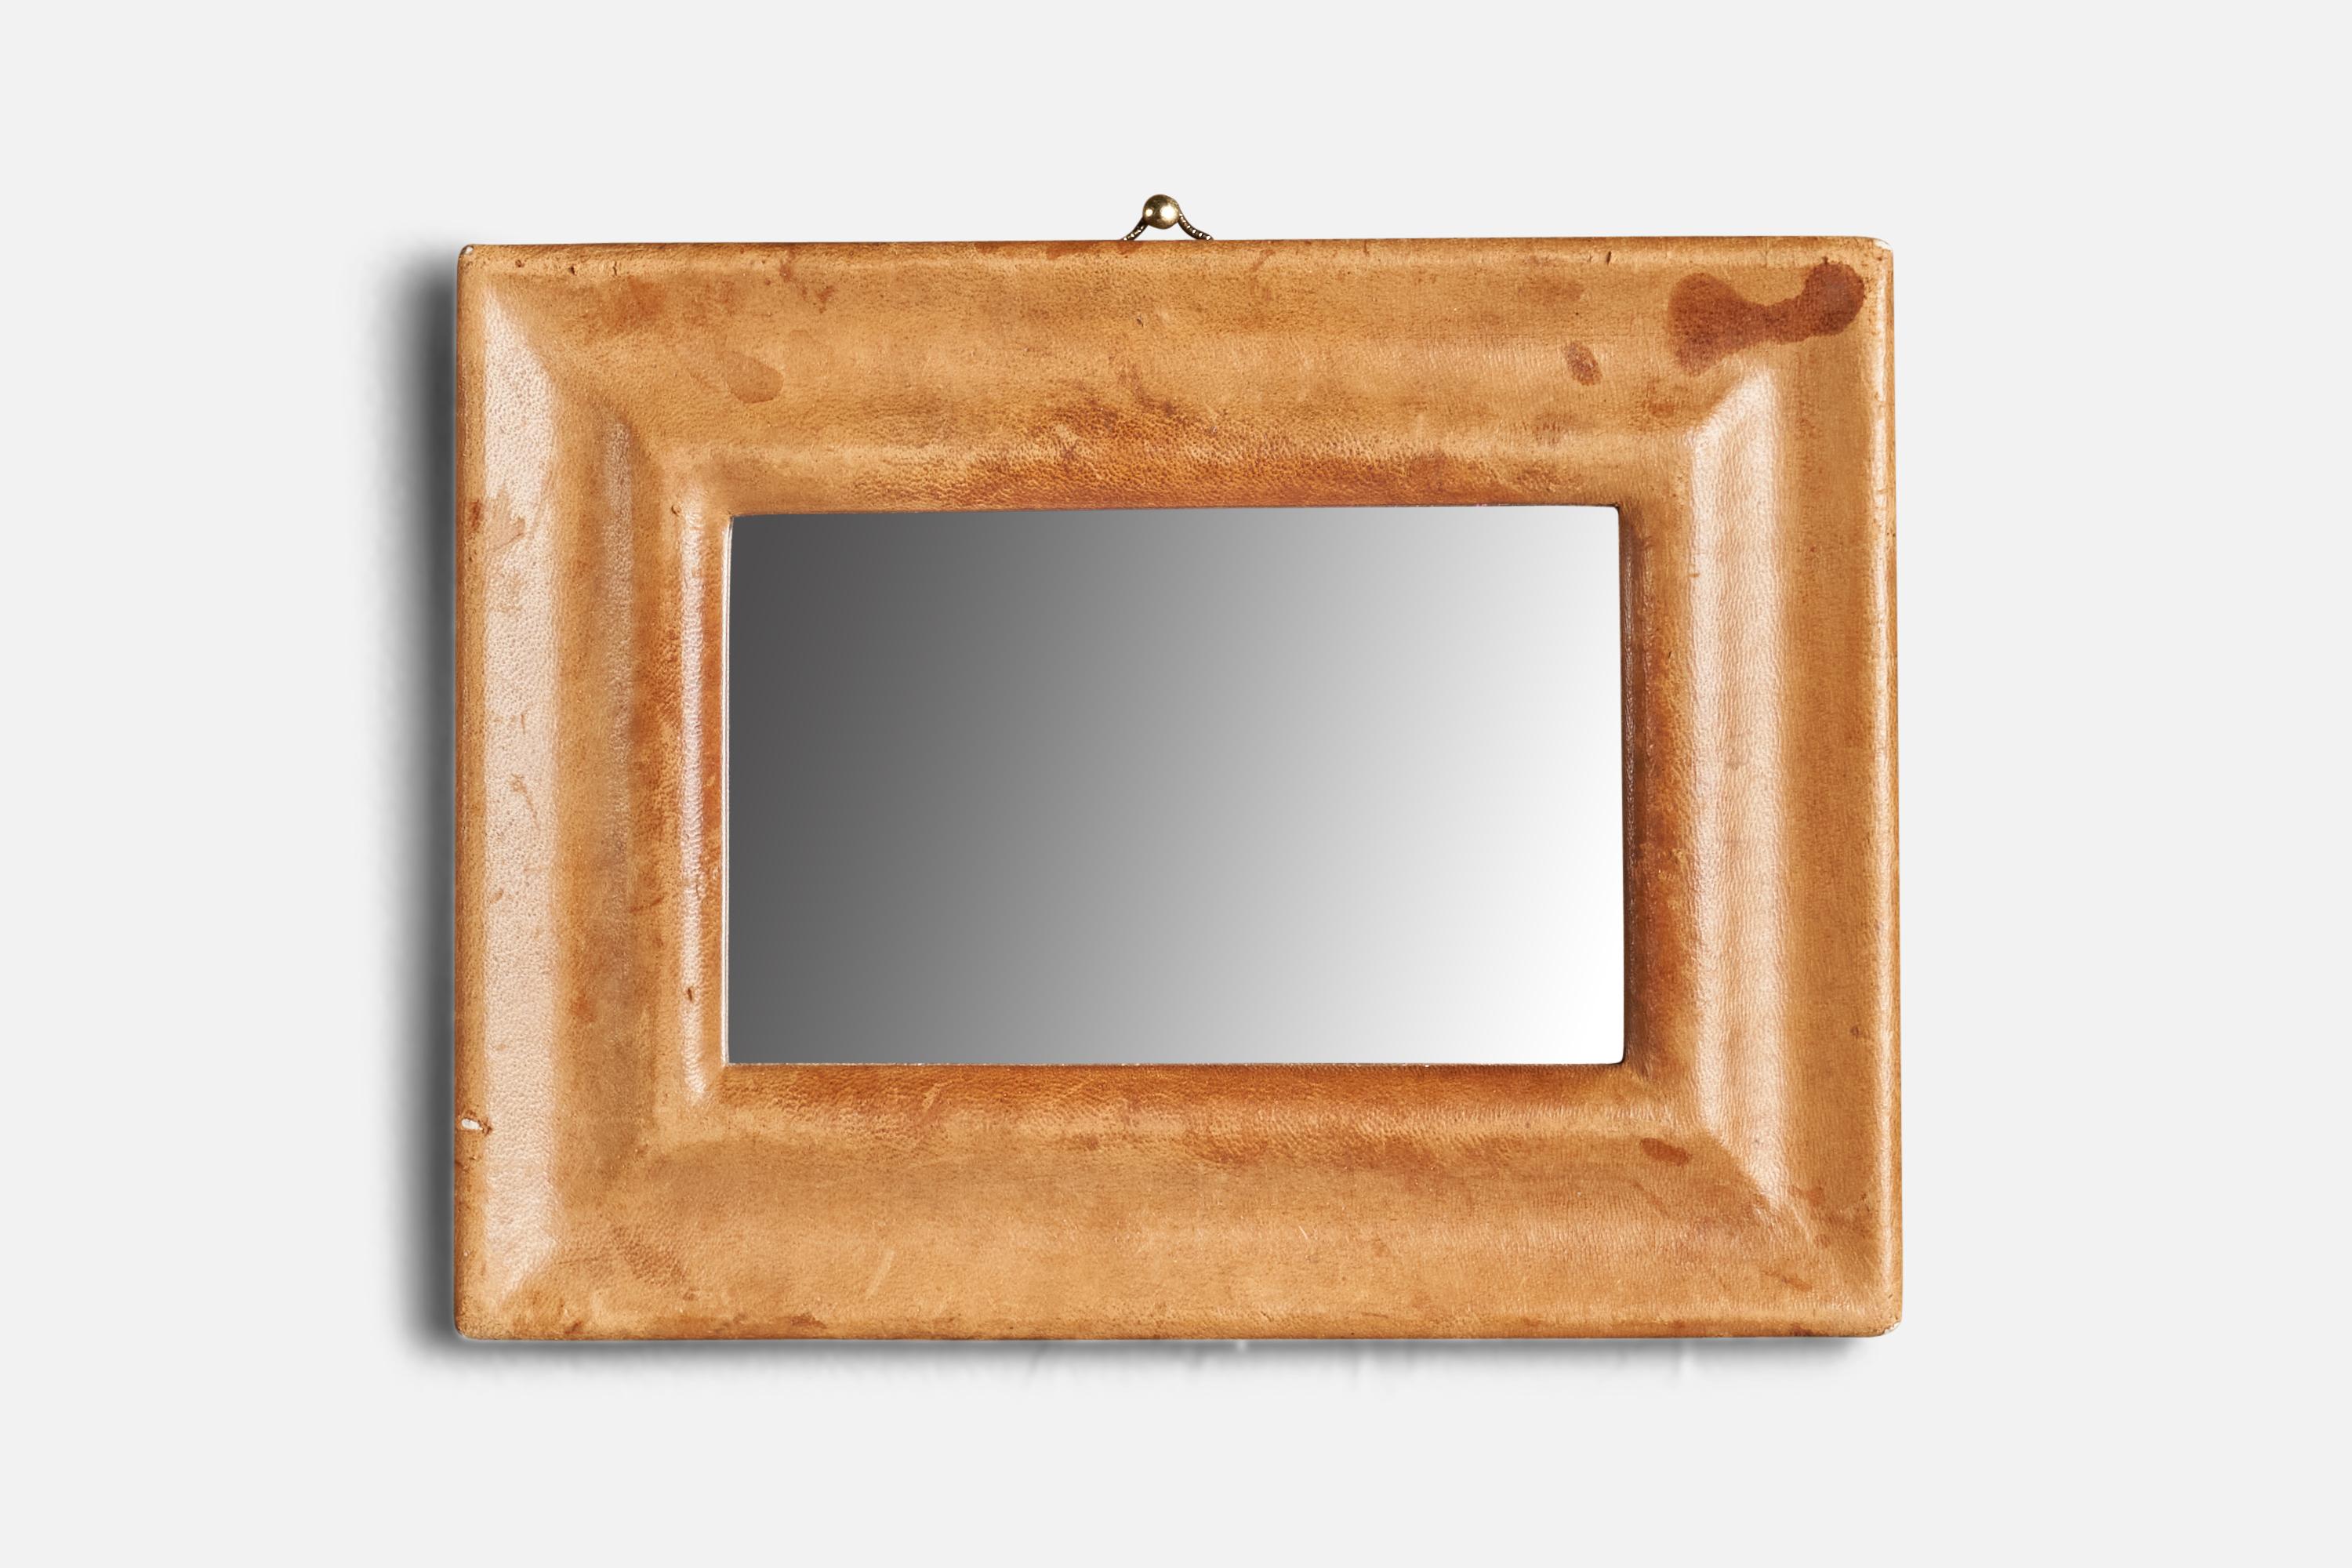 A leather wall mirror designed and produced in Italy, 1940s.